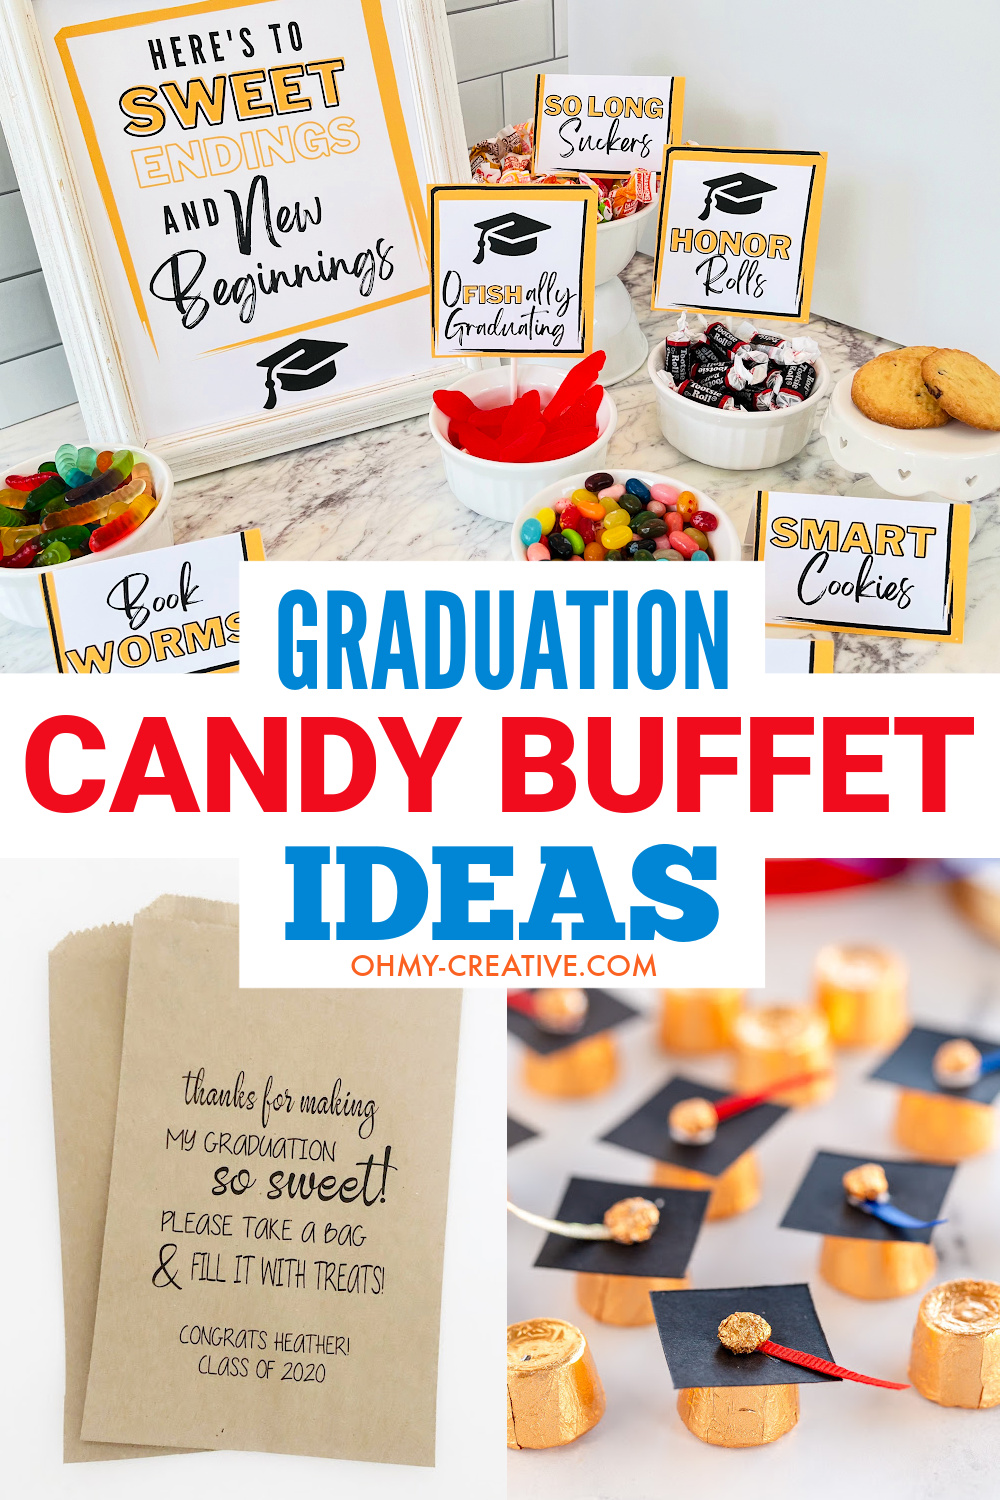 Graduation party candy buffet ideas including printable candy bar signs, graduation party candy favor bags and graduation cap candy.